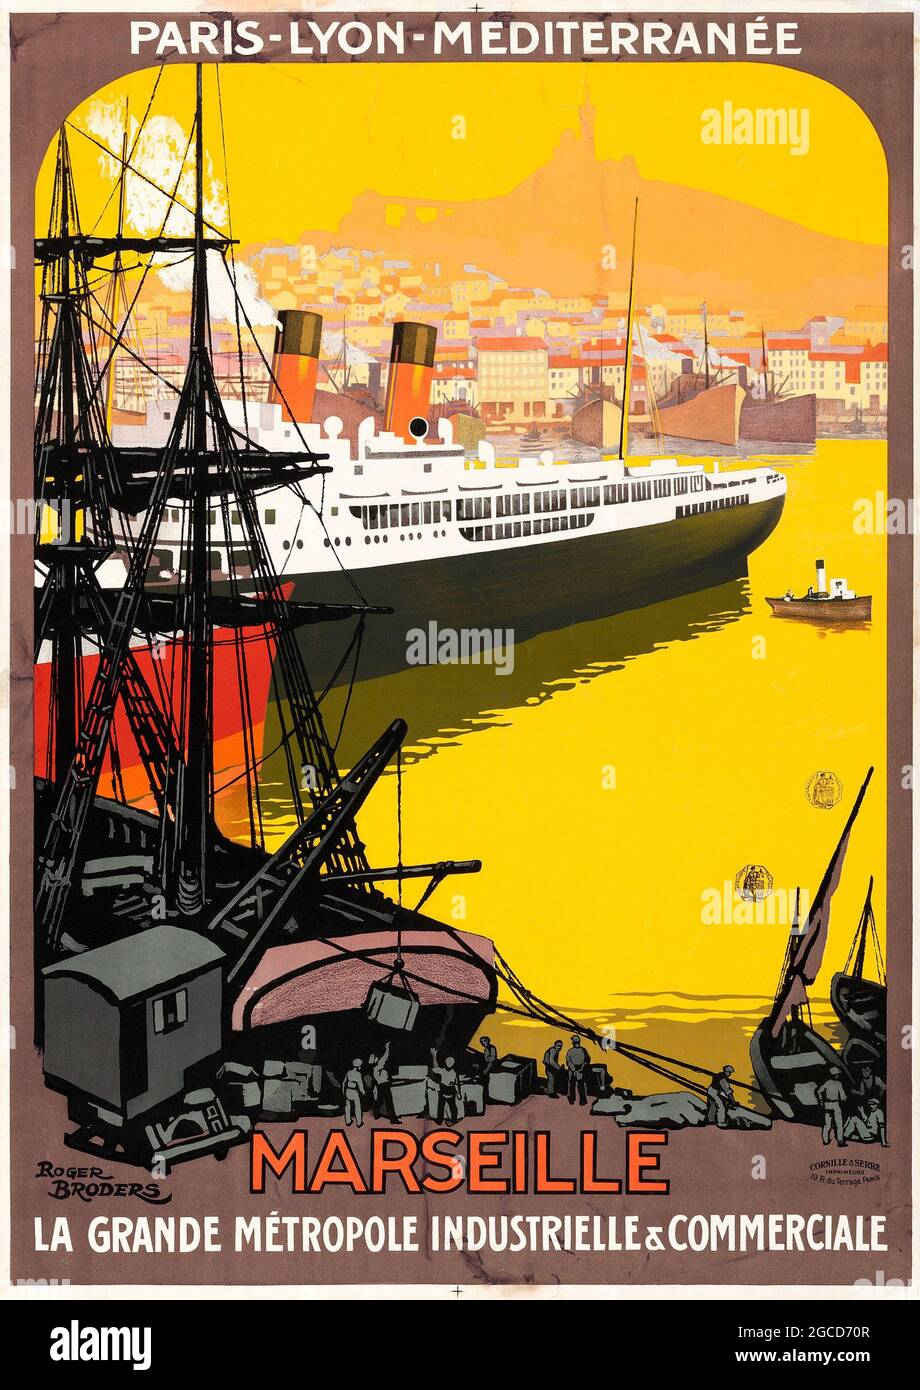 Marseille: La Grande Metrople Industrielle & Commerciale (1920s). French Travel Poster. Roger Broders Artwork. Stock Photo